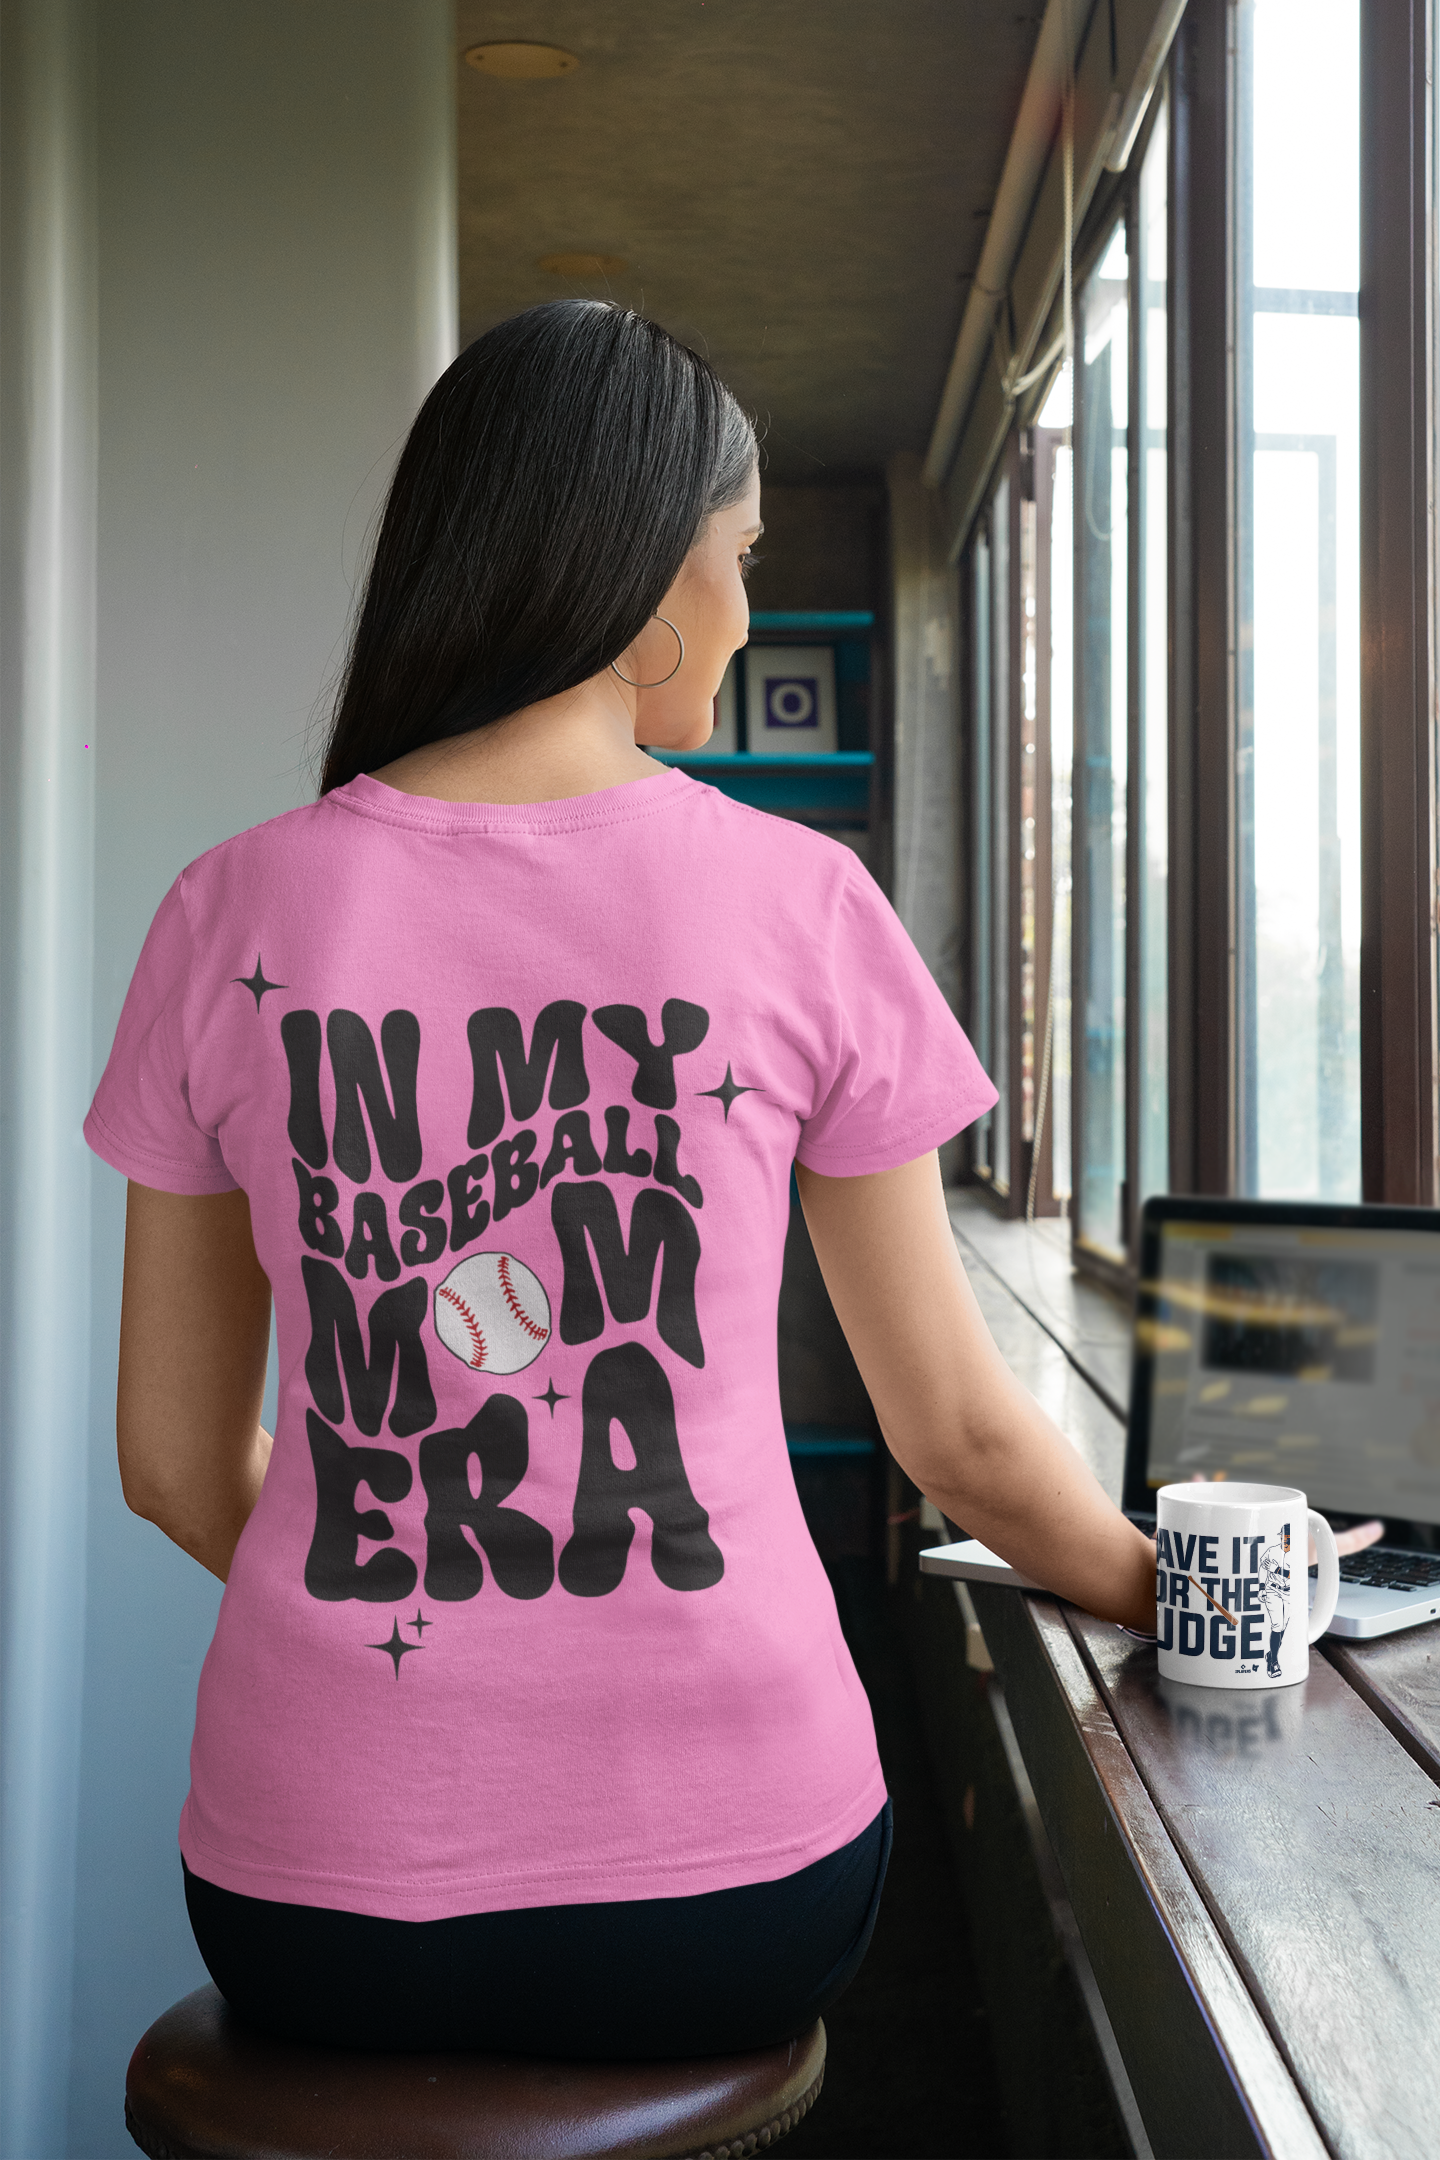 Baseball Mom Era Women's Softstyle T-Shirt - Chic & Durable, Perfect for Game Day